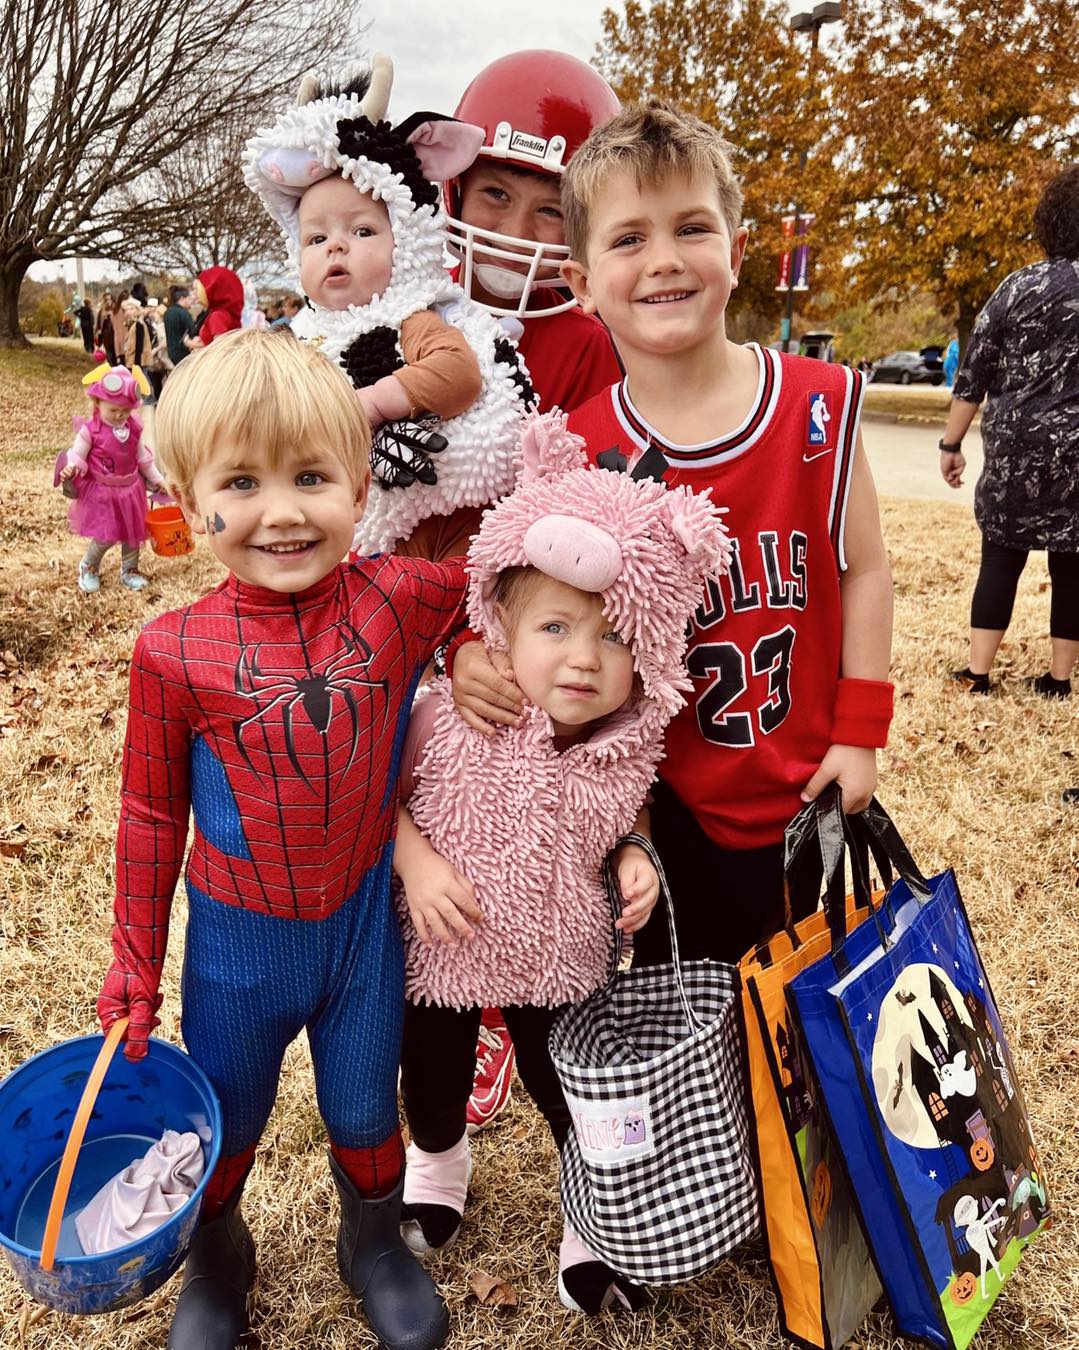 Five children in Halloween costumes pose for a photo